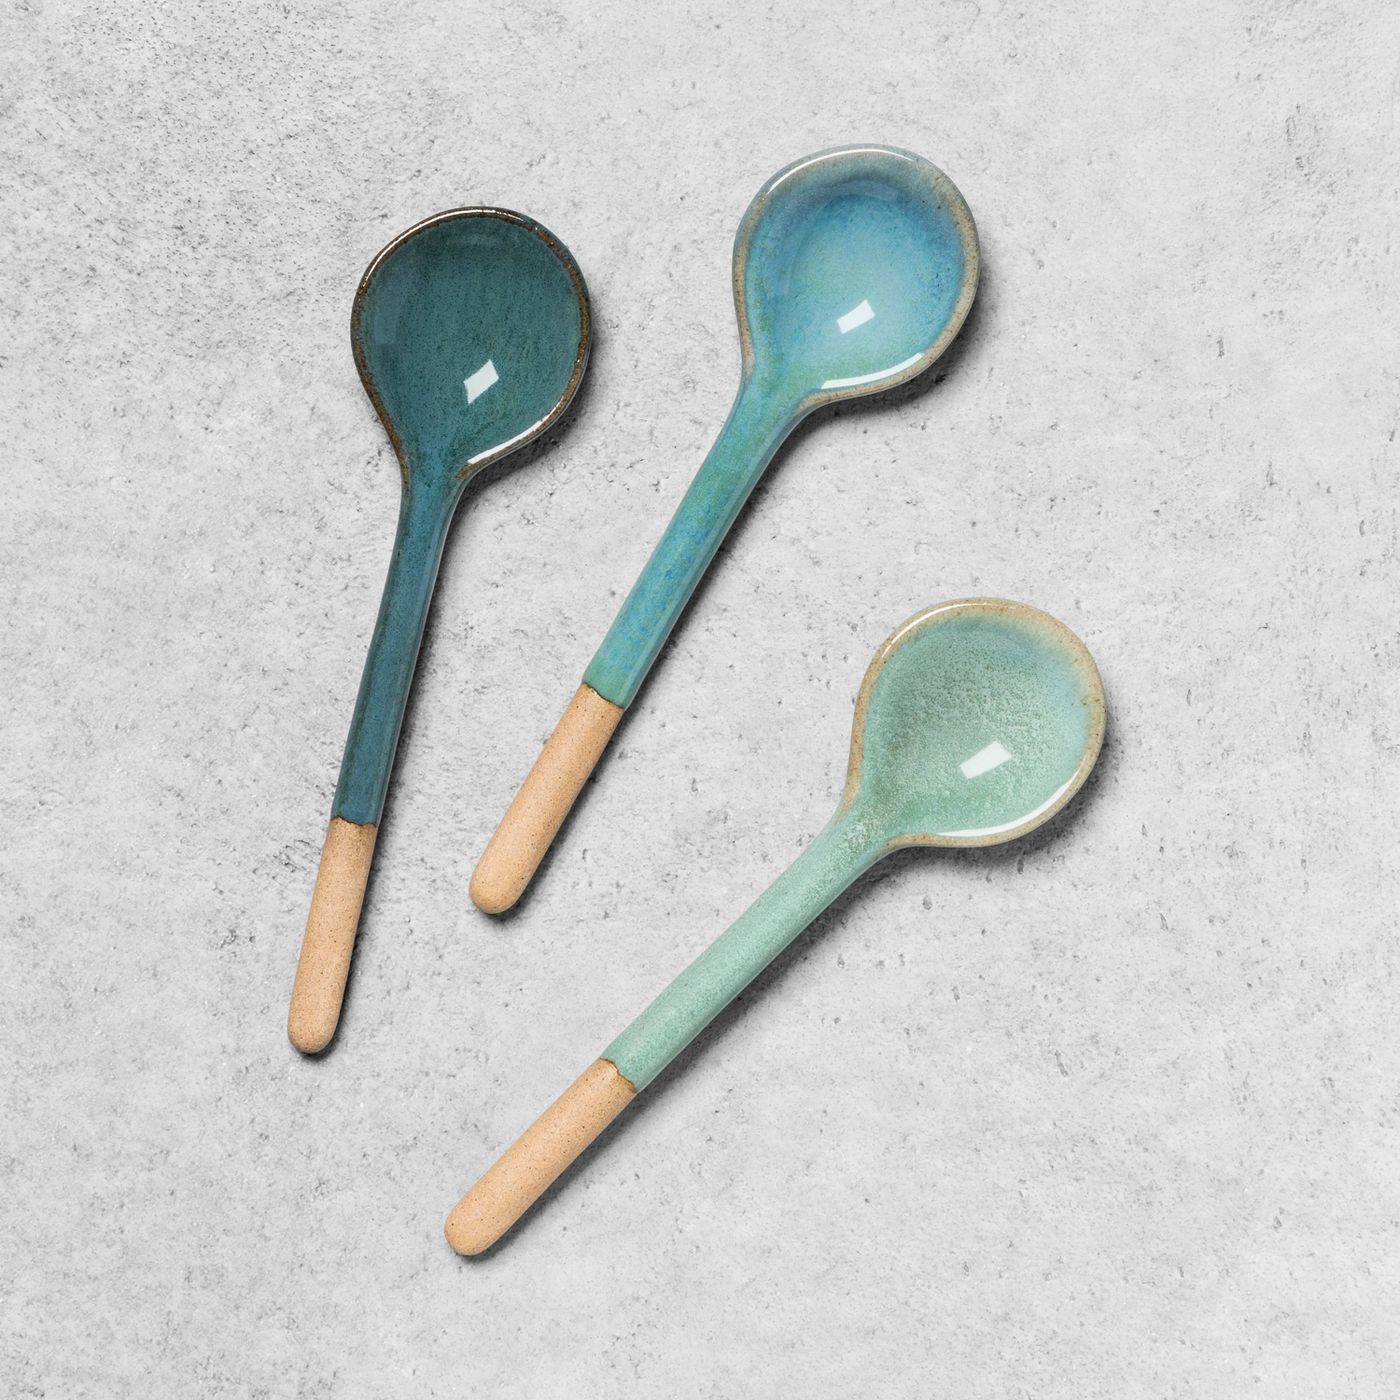 A trio of spoons in blues and greens